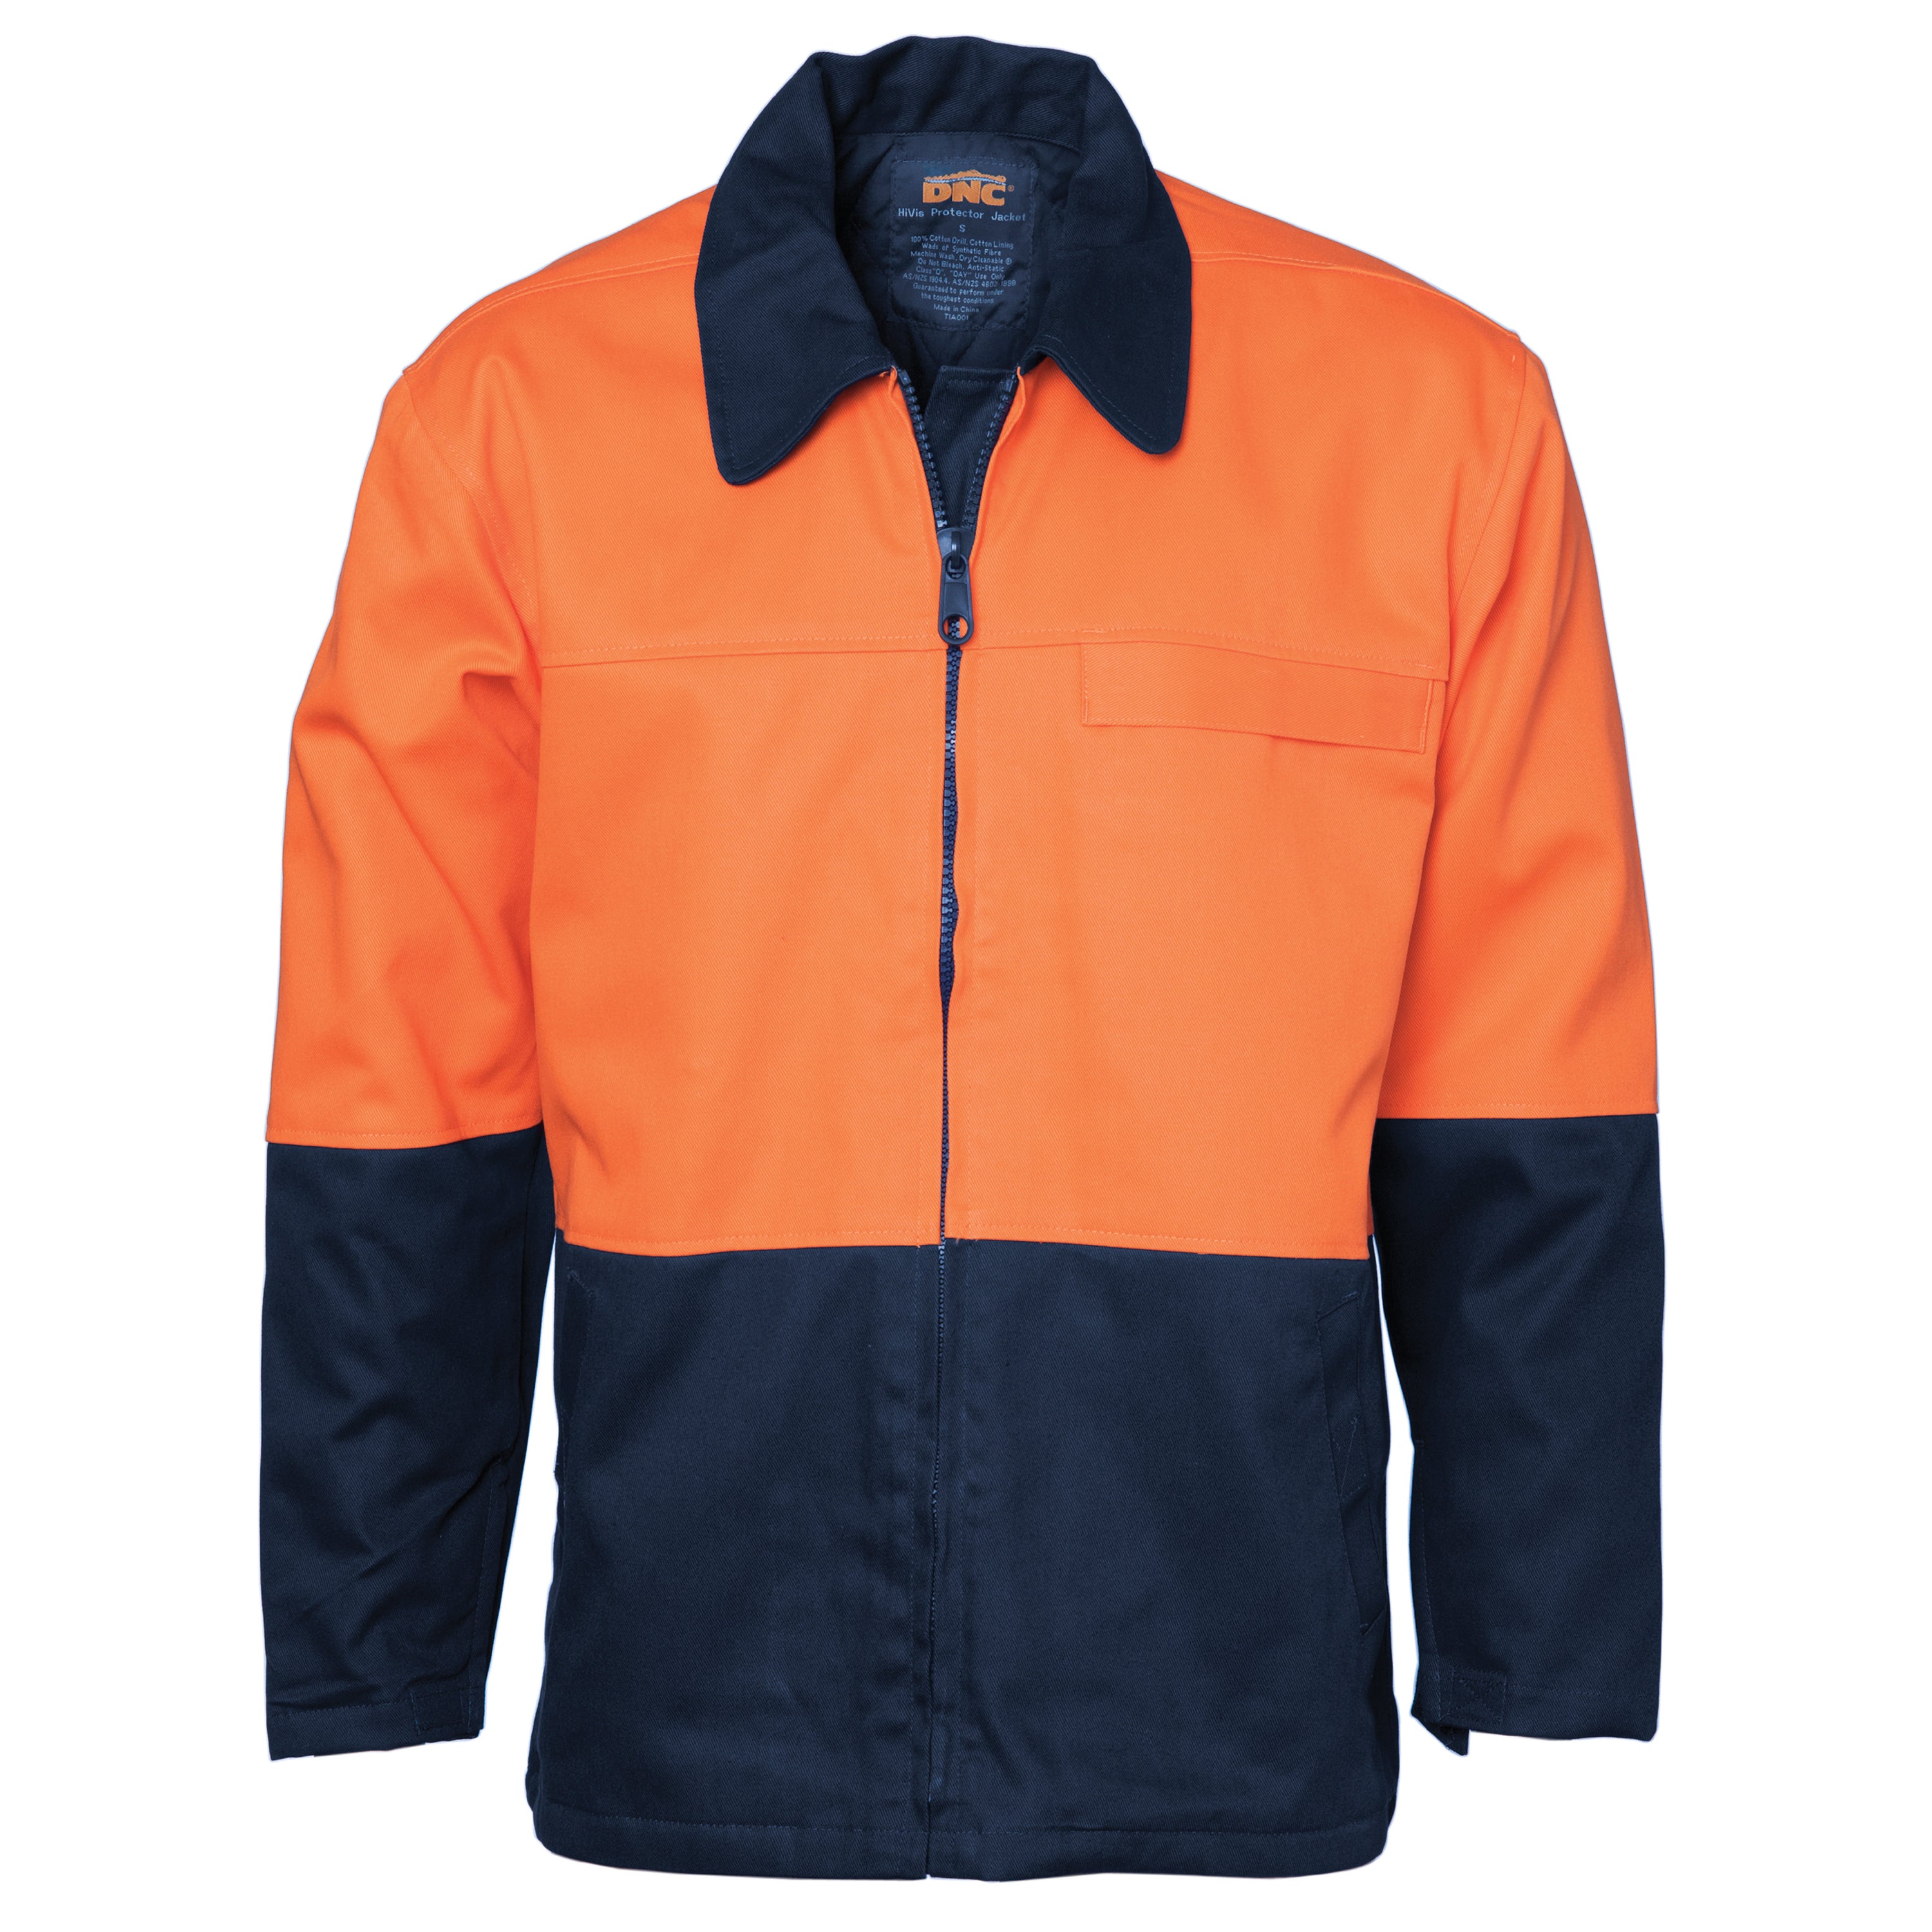 DNC 3868 Hi-Vis Two Tone Protect or Drill Jacket